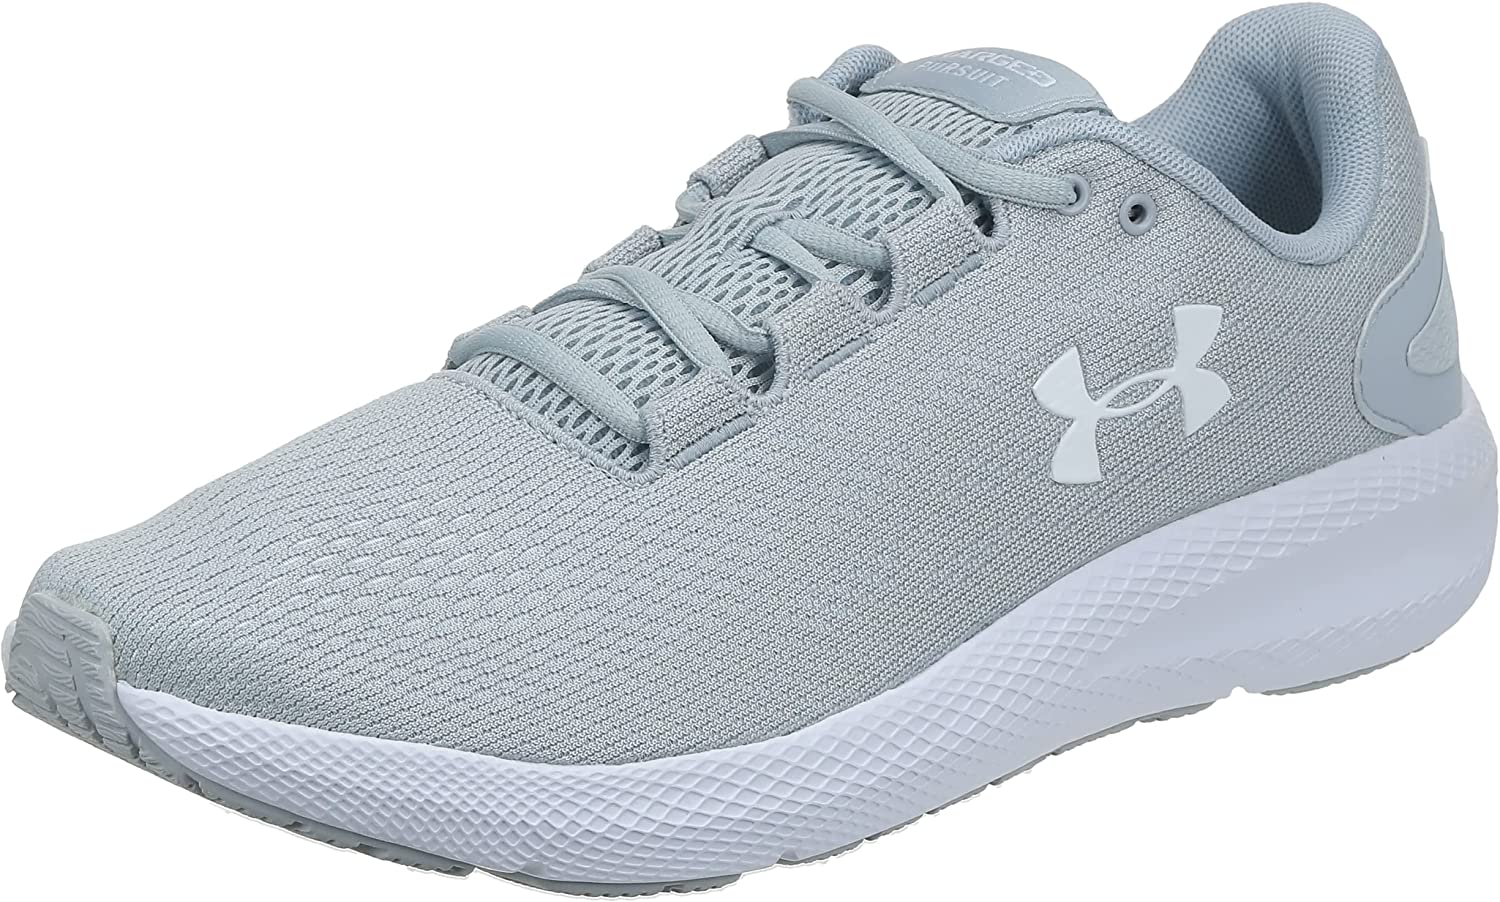 Under Armour Men's Charged Pursuit 2 Running Shoe